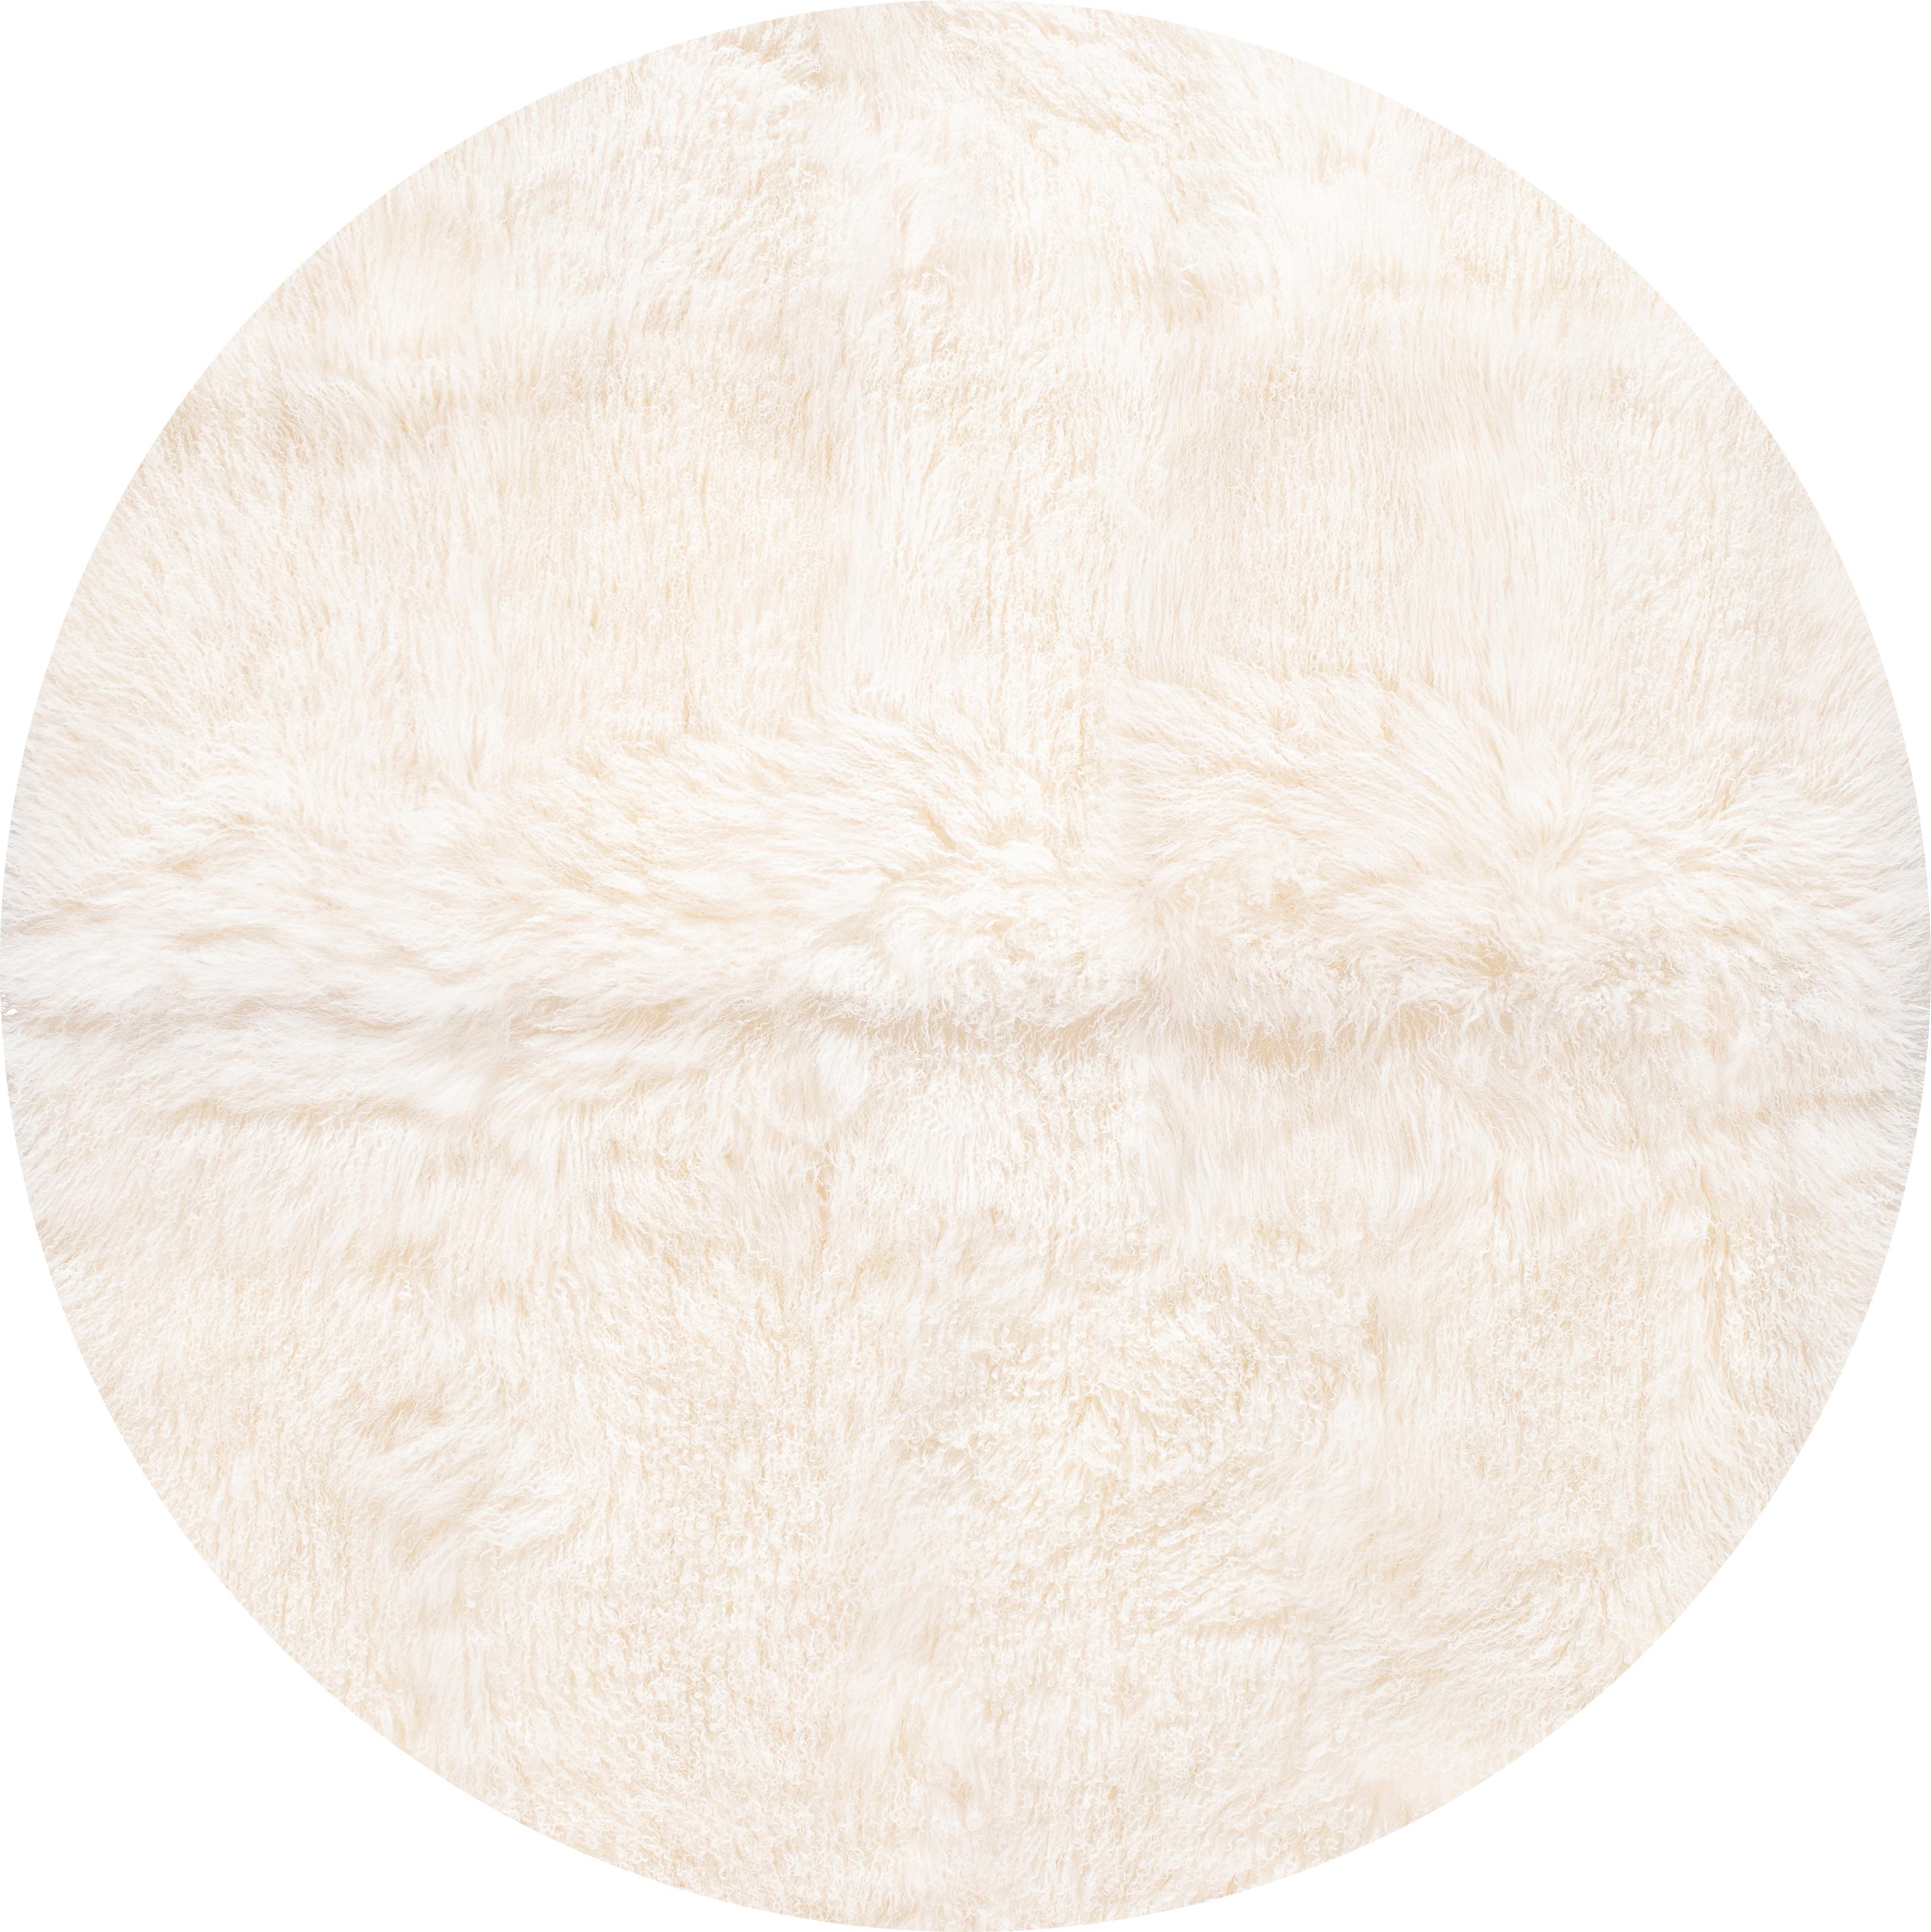 21st century modern Tibetan Mohair rug with an all-over natural design.
This rug measures: 6' x 9'.